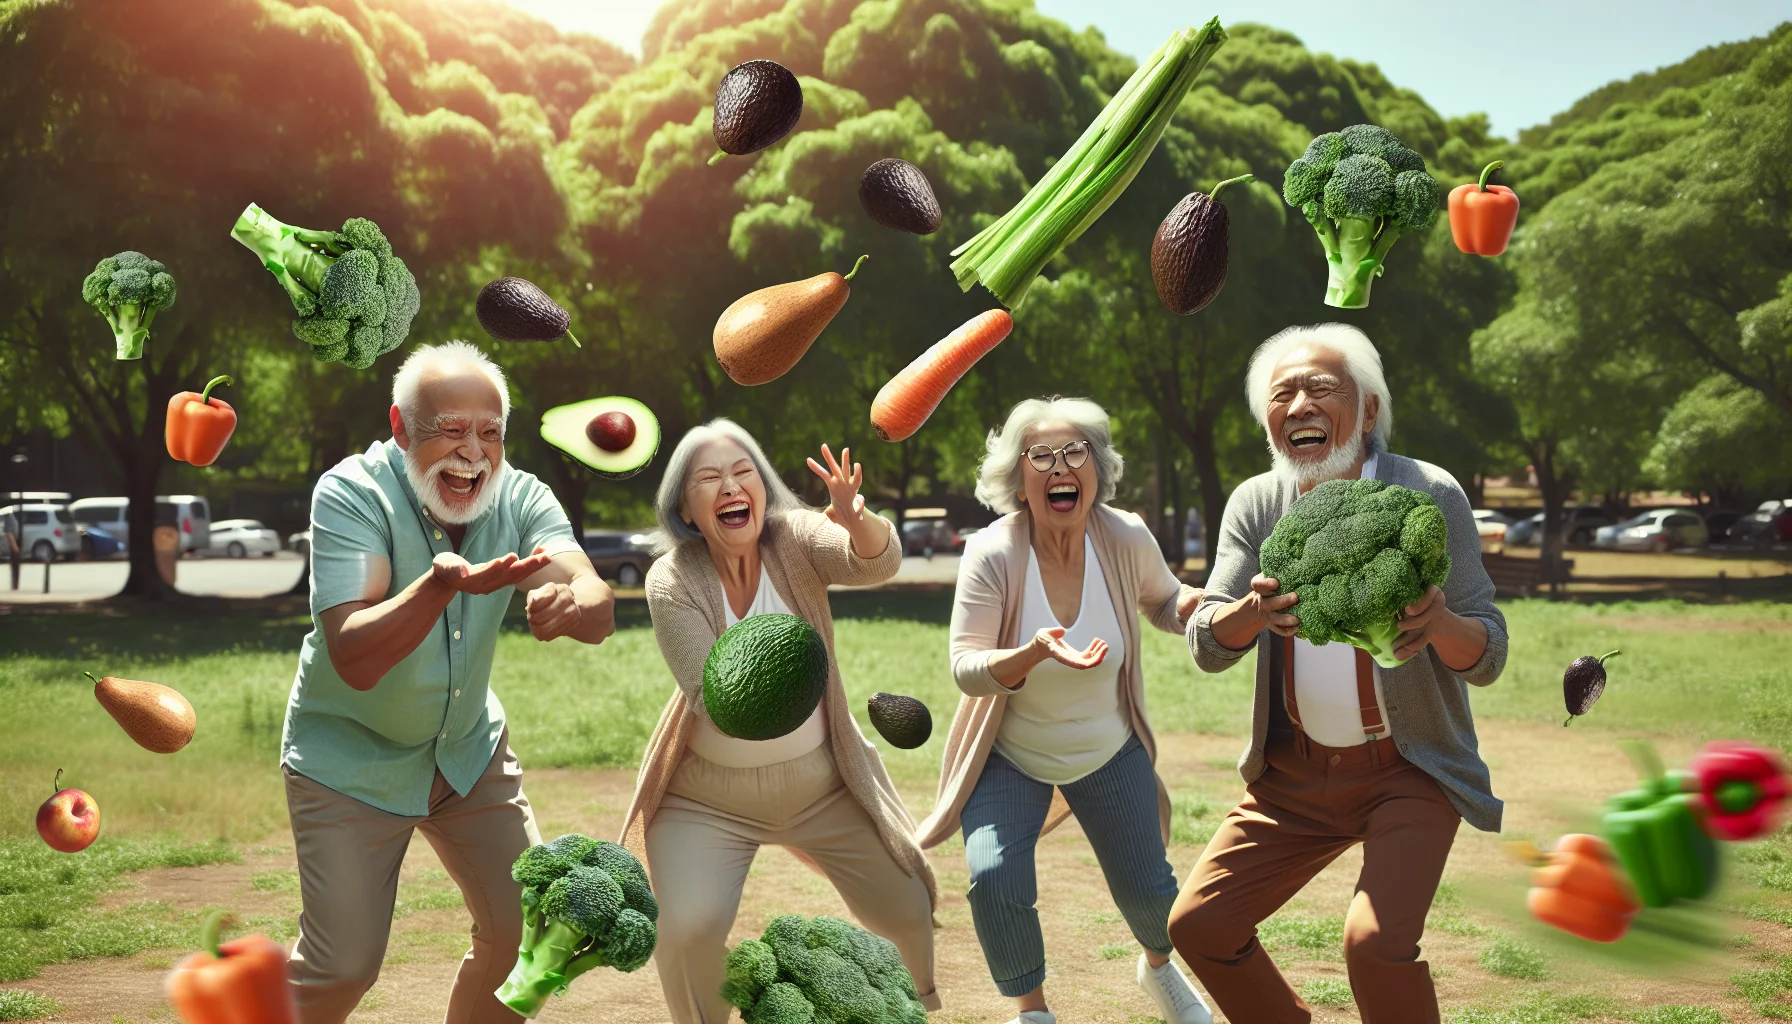 Generate an amusing, realistic scene showcasing various high-fiber, low-carb foods. Imagine a setting in a sunny park, where three, lively elderly individuals, a Caucasian man, an African-American woman, and a South-Asian gentleman are having a playful food fight. They are gently tossing broccoli, throwing avocados like they were baseballs and wearing celery stalks as decorative ornaments. The food is not only flying around, making the scene very humorous, but it also highlights the importance of healthy eating and diets. The laughter and joy in their faces is contagious, reminding us that healthy eating can be fun at any age.